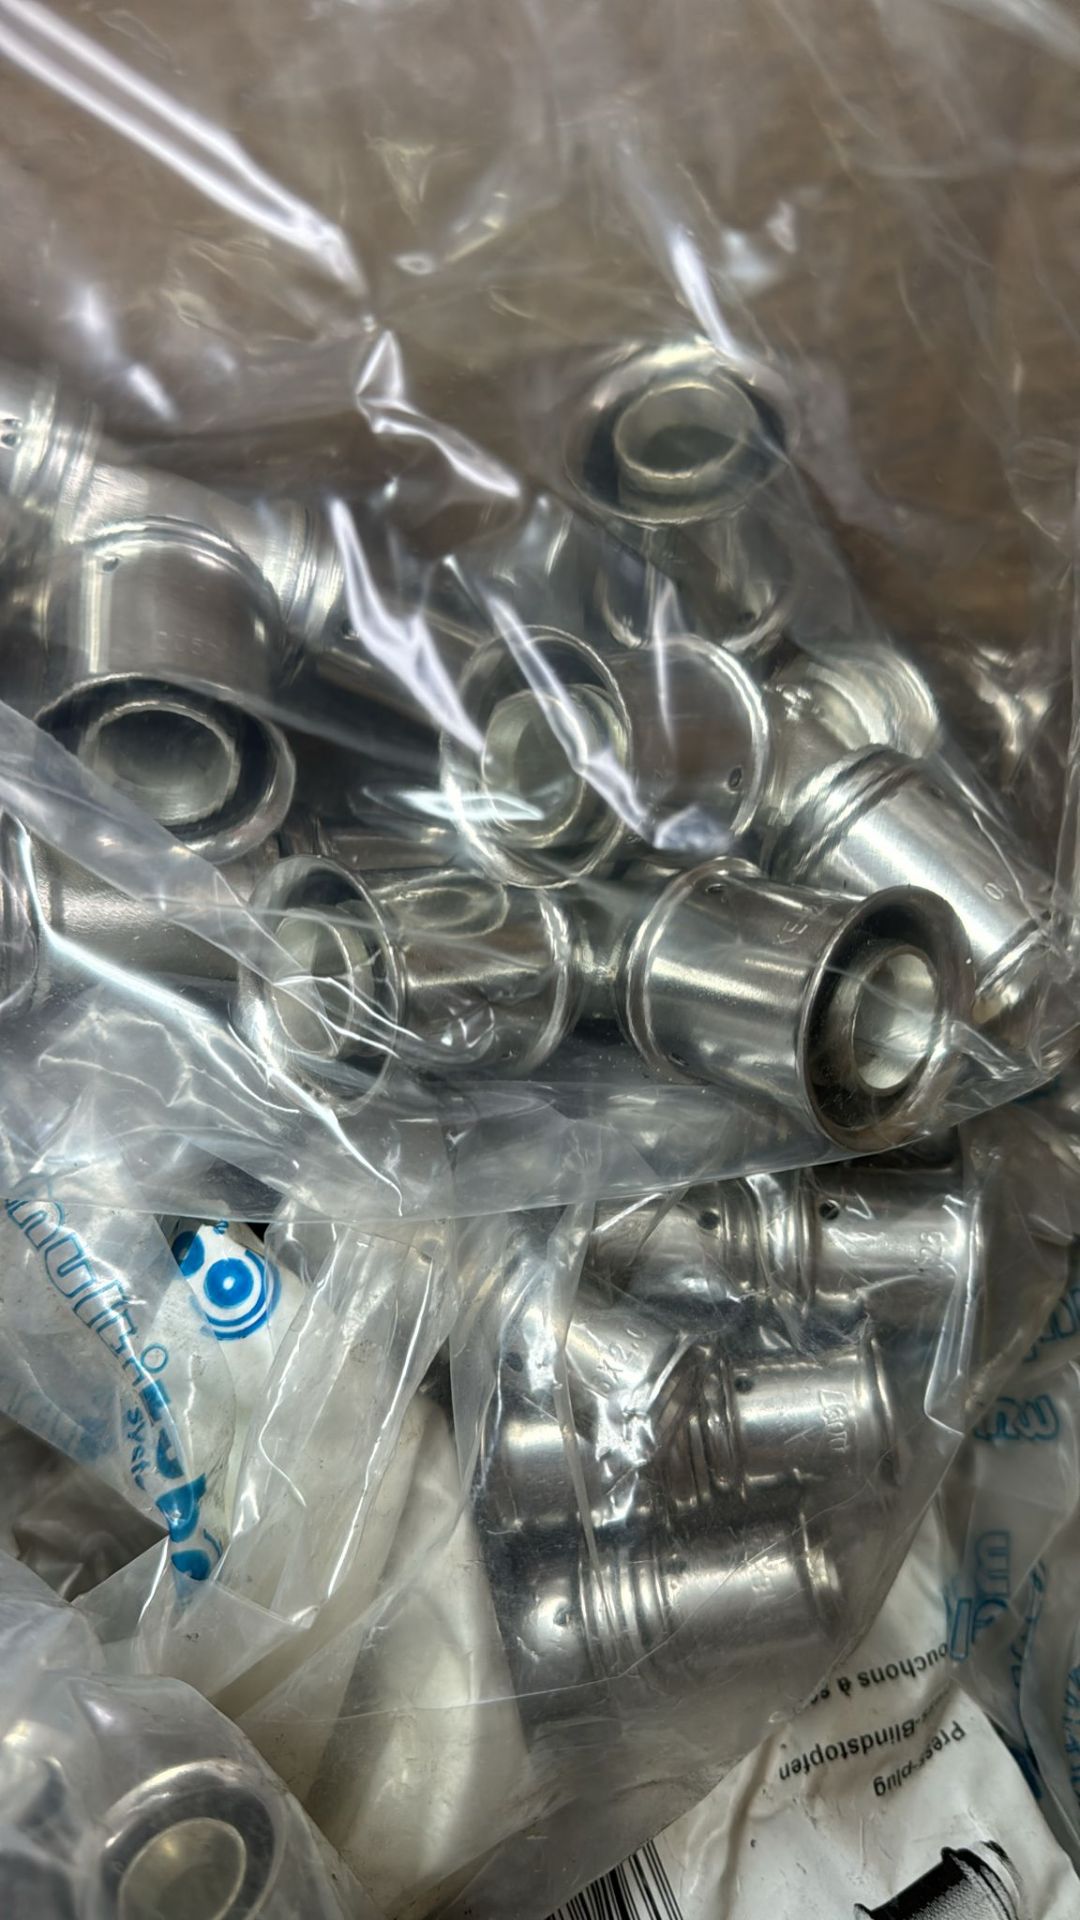 Plumbing press fit fittings 16mm,20mm,25mm various fittings well over 500 fittings - Image 4 of 7